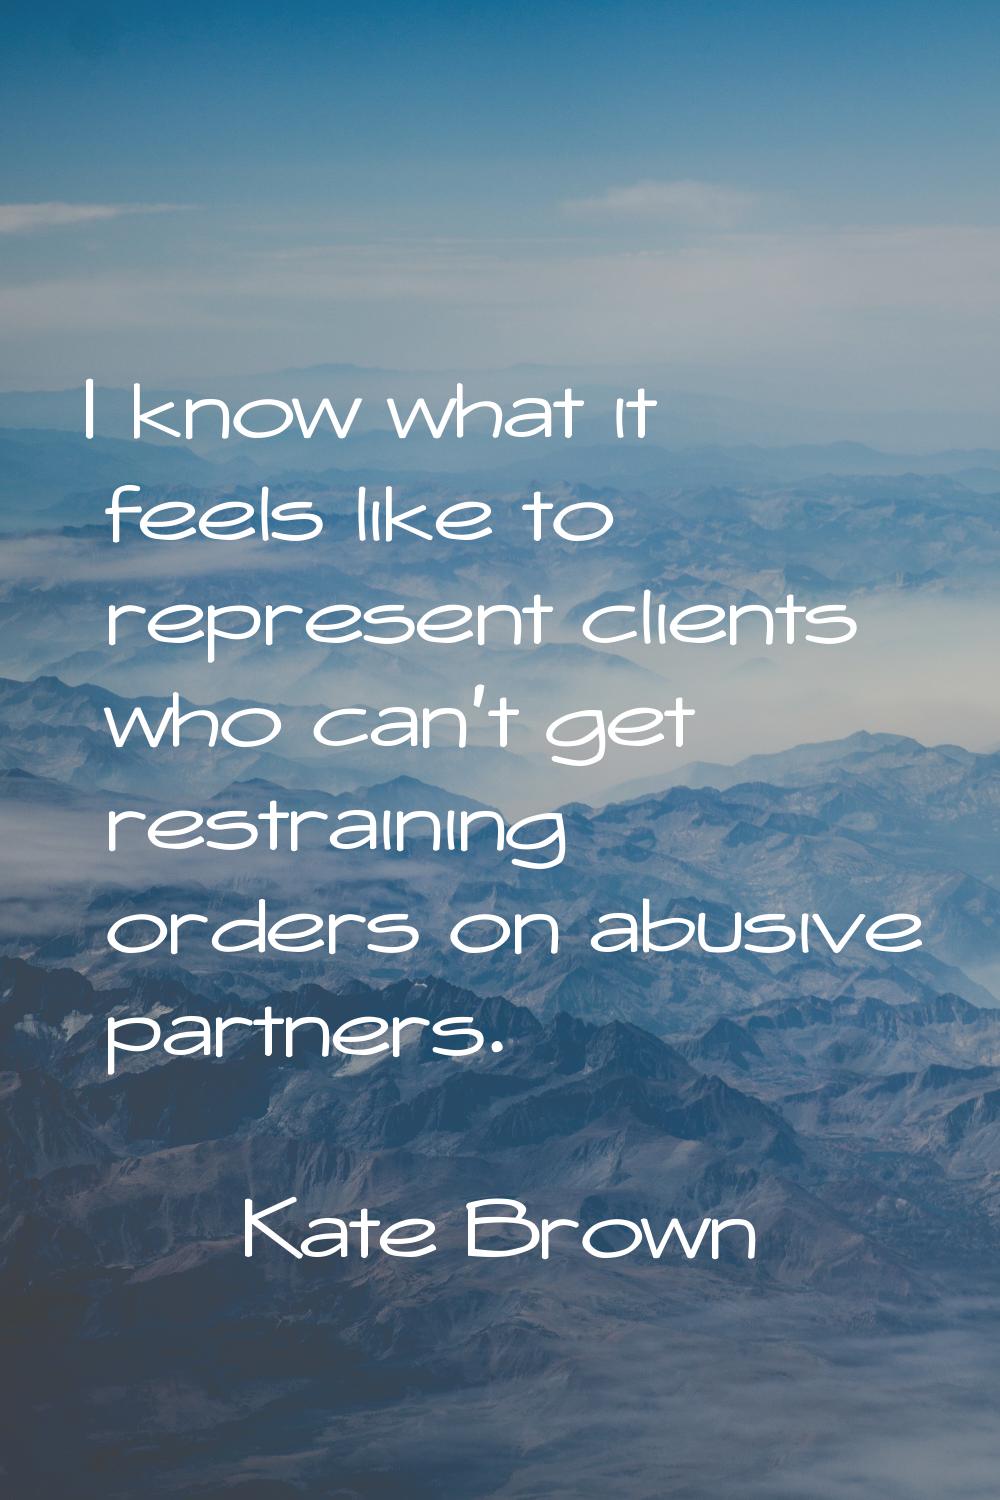 I know what it feels like to represent clients who can't get restraining orders on abusive partners